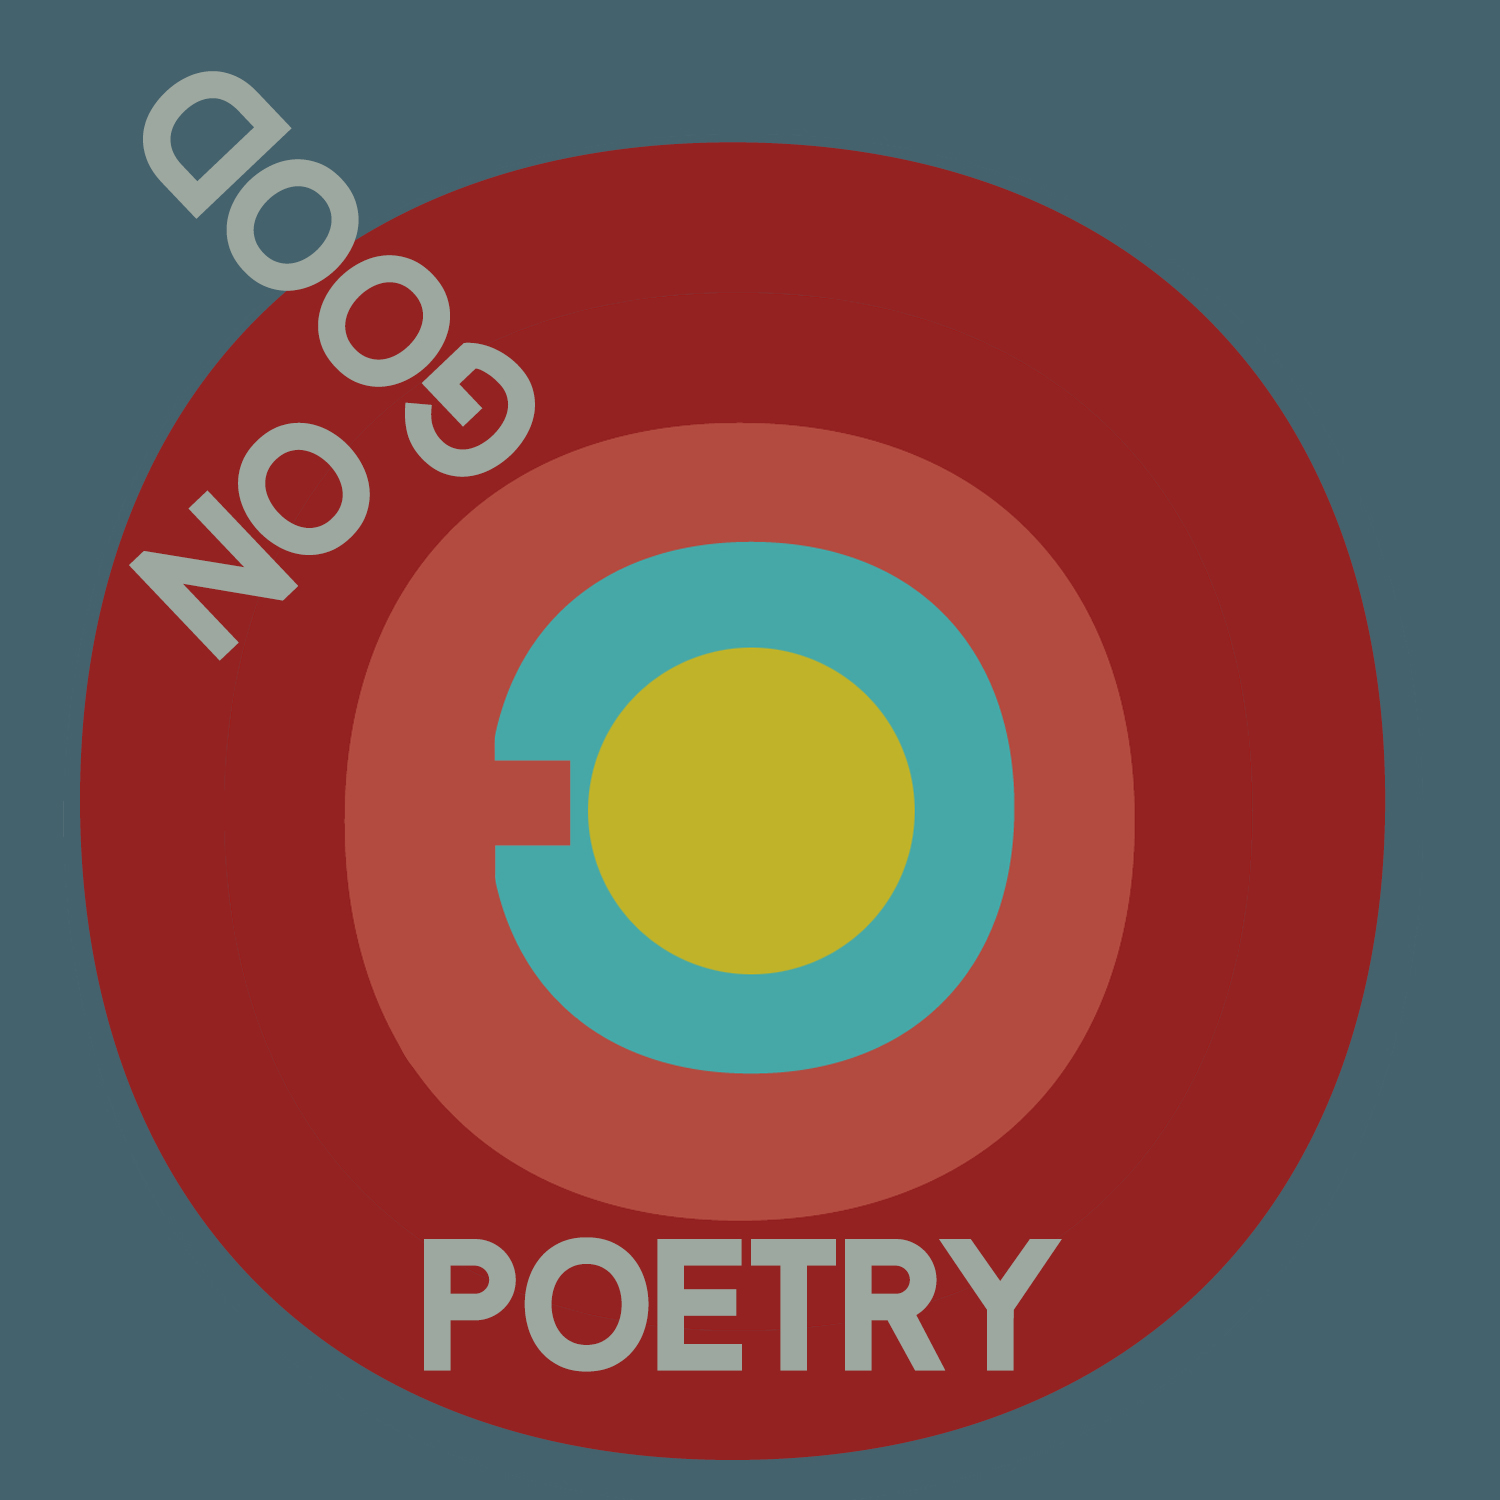 Episode 63: Poets and Suicide